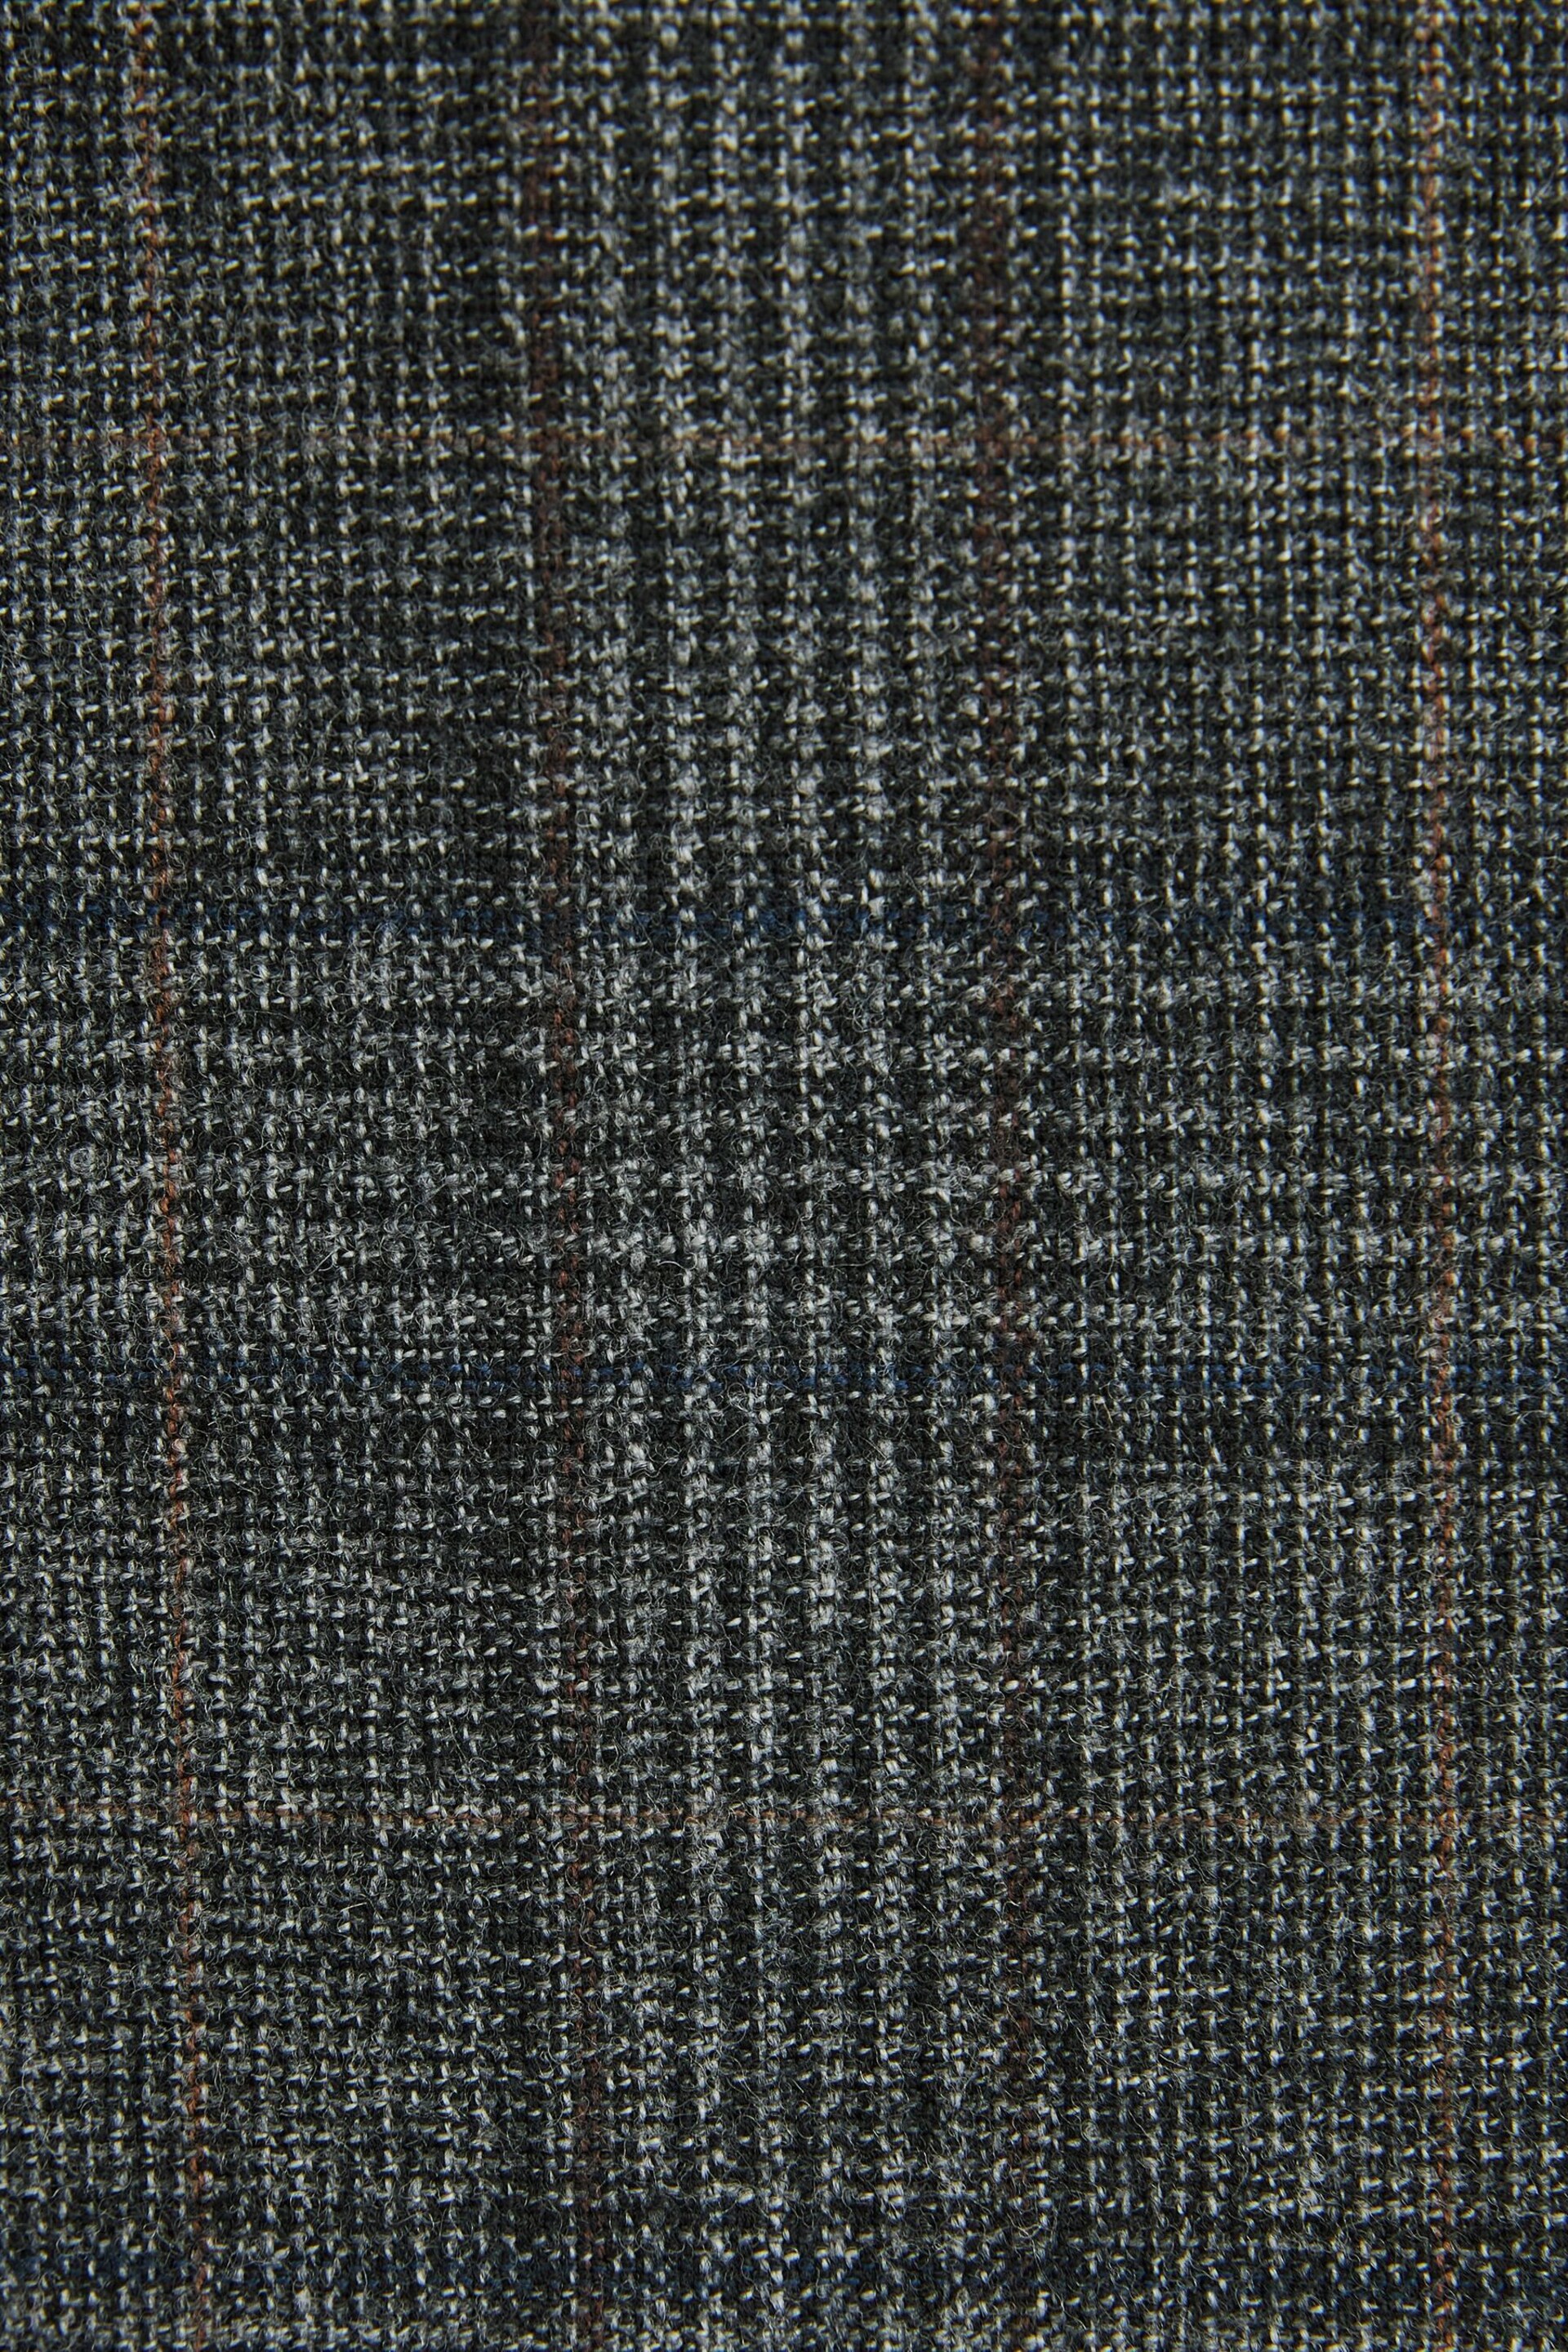 Grey Slim Fit Signature Check Suit: Jacket - Image 9 of 12